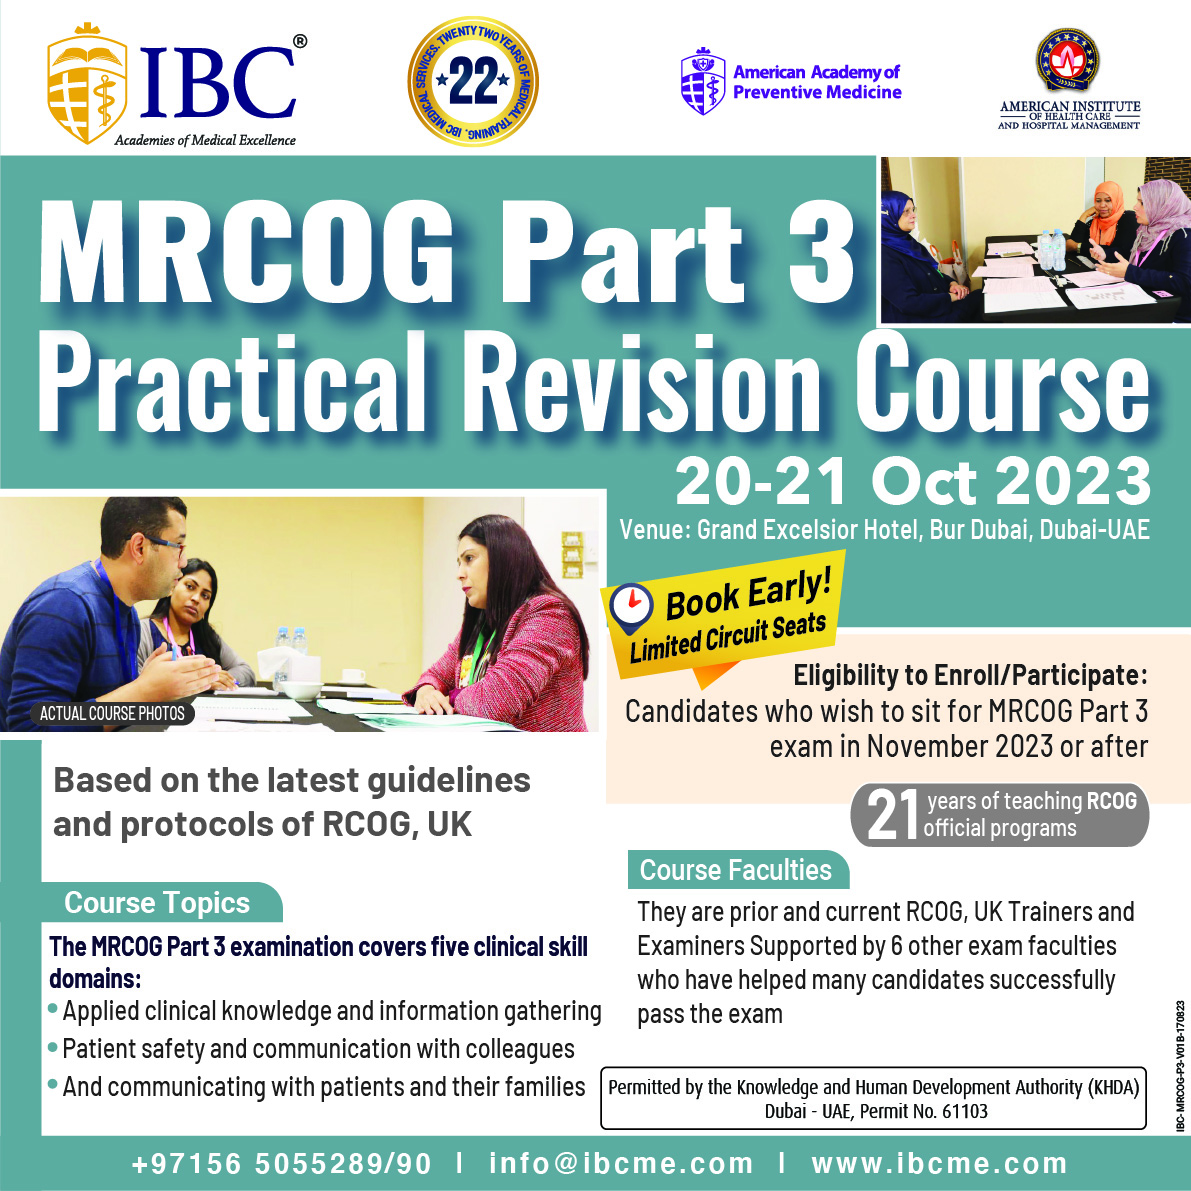 MRCOG Part 3 Practical Revision Course, 20-21 Oct, 2023, Dubai, UAE  shorturl.at/dntCW +971 56 505 5289, +971 56 505 5292, +971 4 337 0400, +20 114 808 4253, or +91 989 208 2699, or email us at info@ibcme.com. #MRCOGPart3 #MedicalExamPreparation